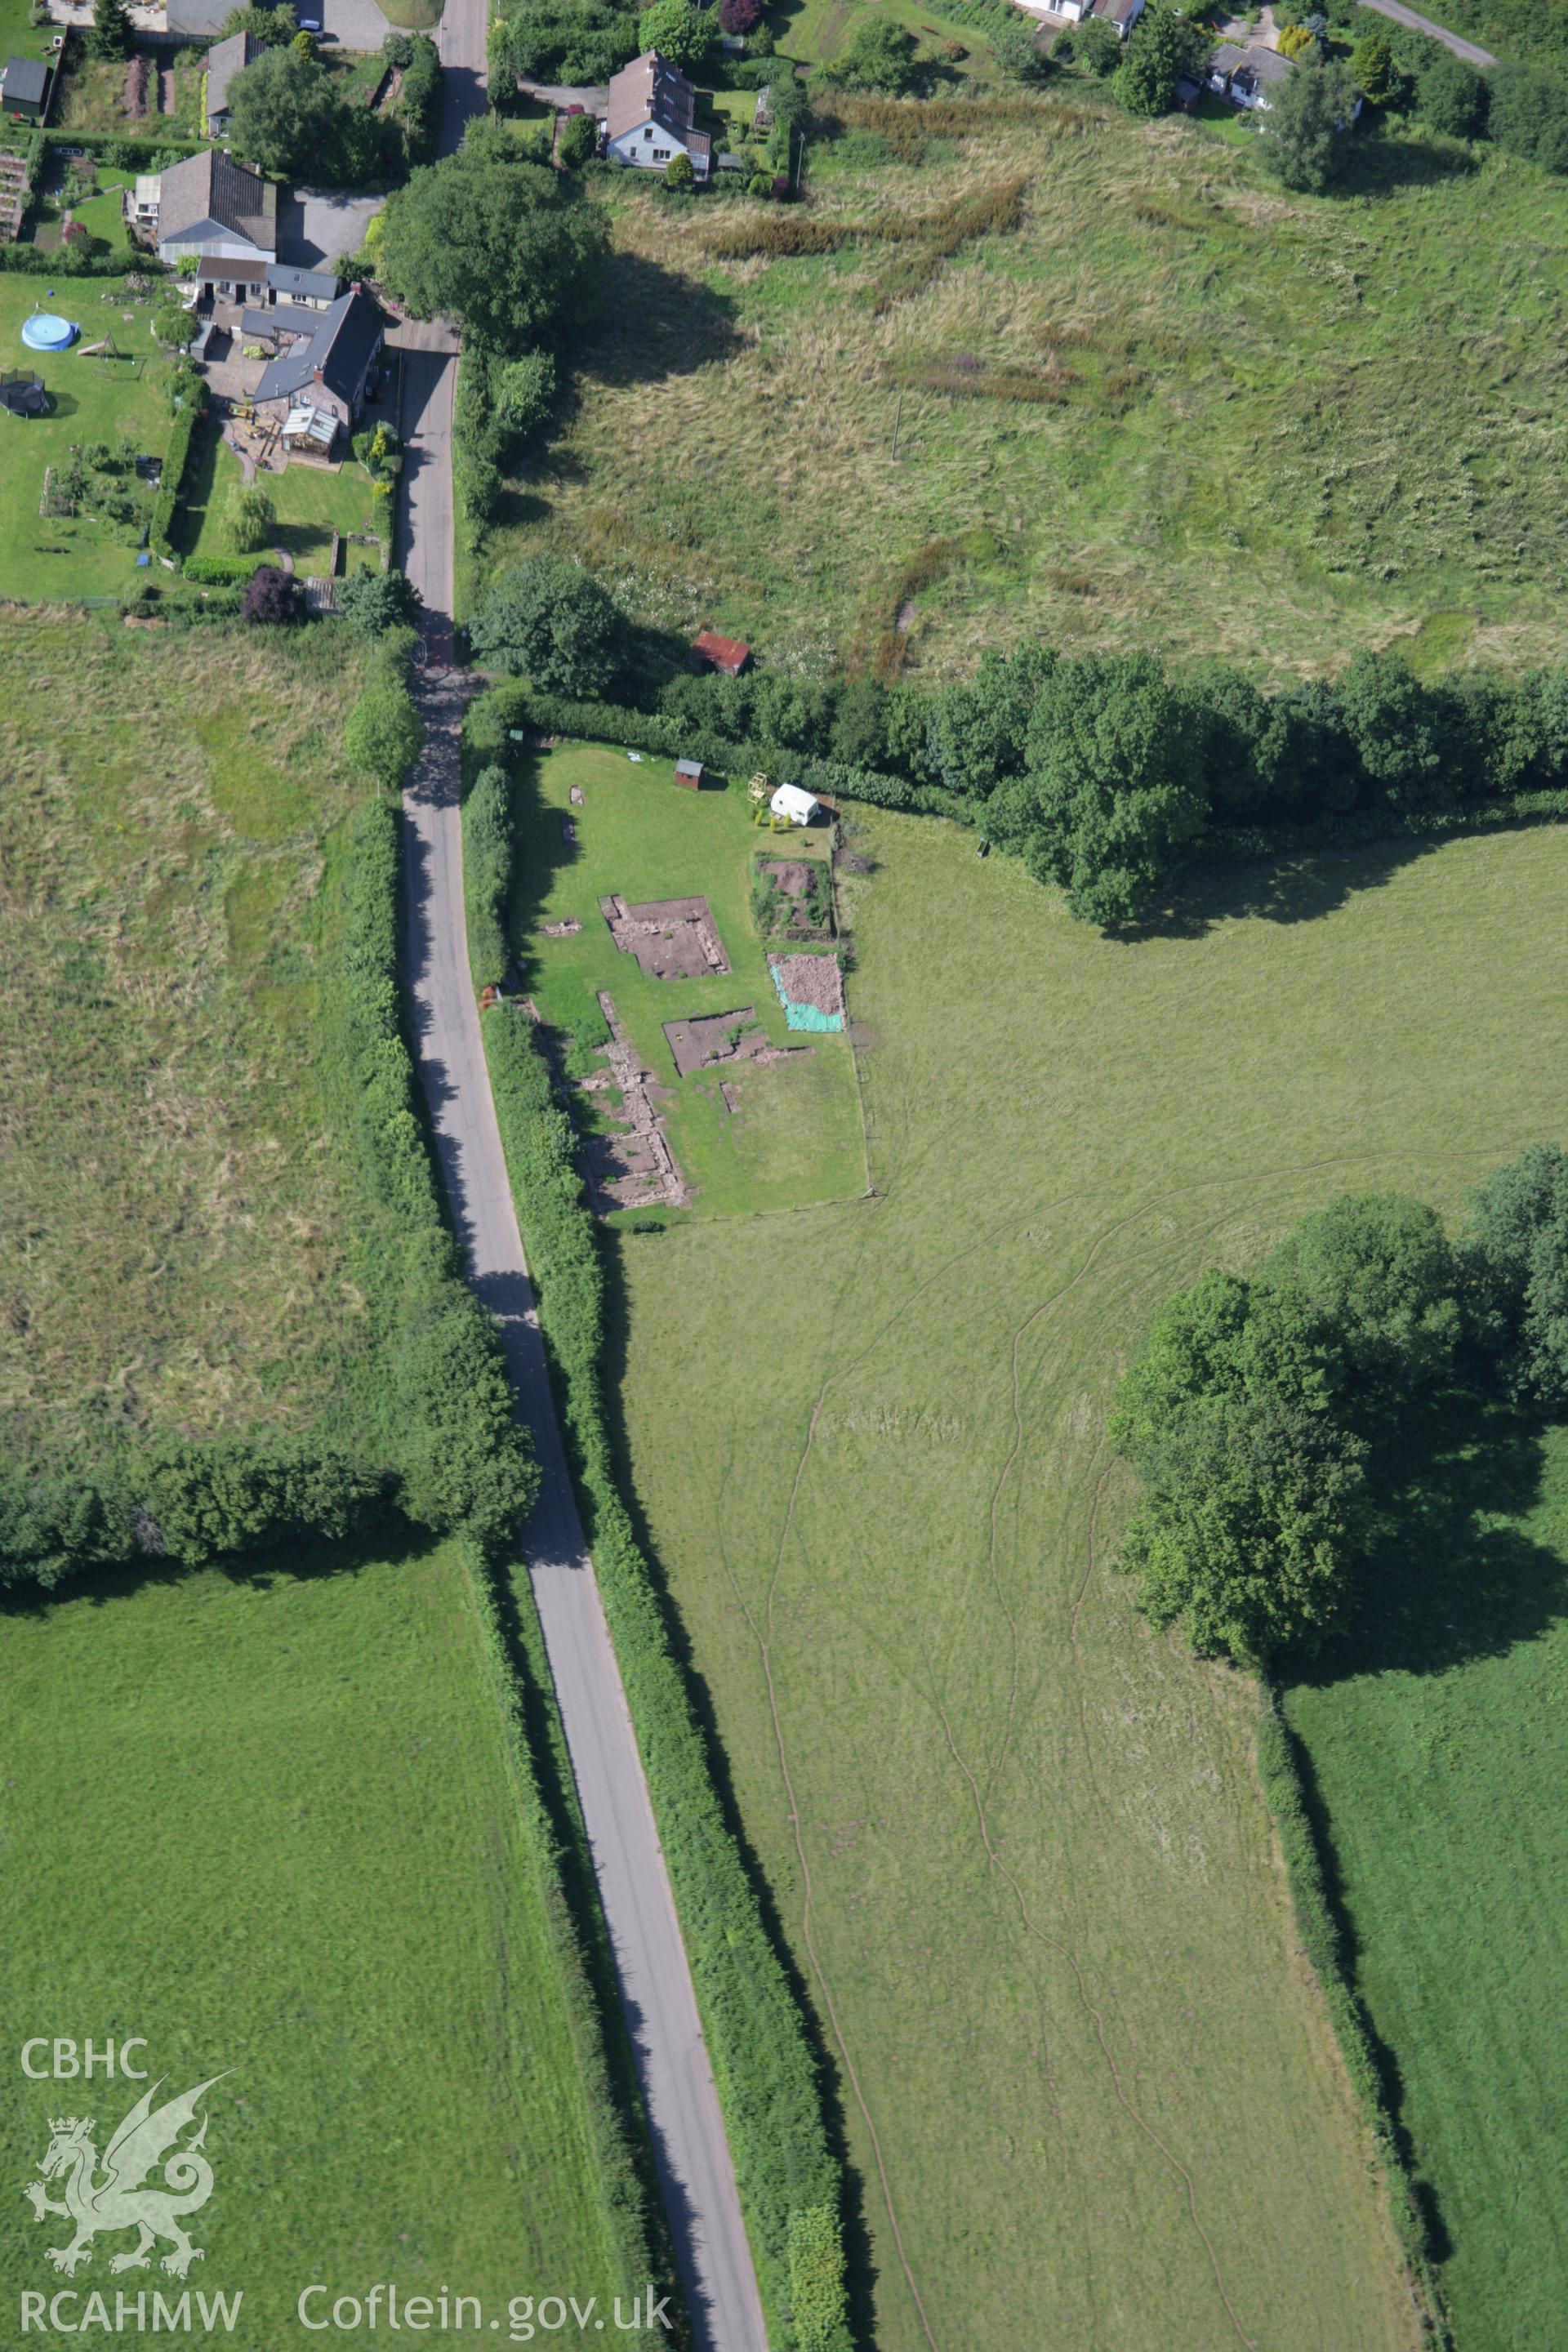 RCAHMW colour oblique aerial photograph of Trelech Village Earthworks. Taken on 13 July 2006 by Toby Driver.